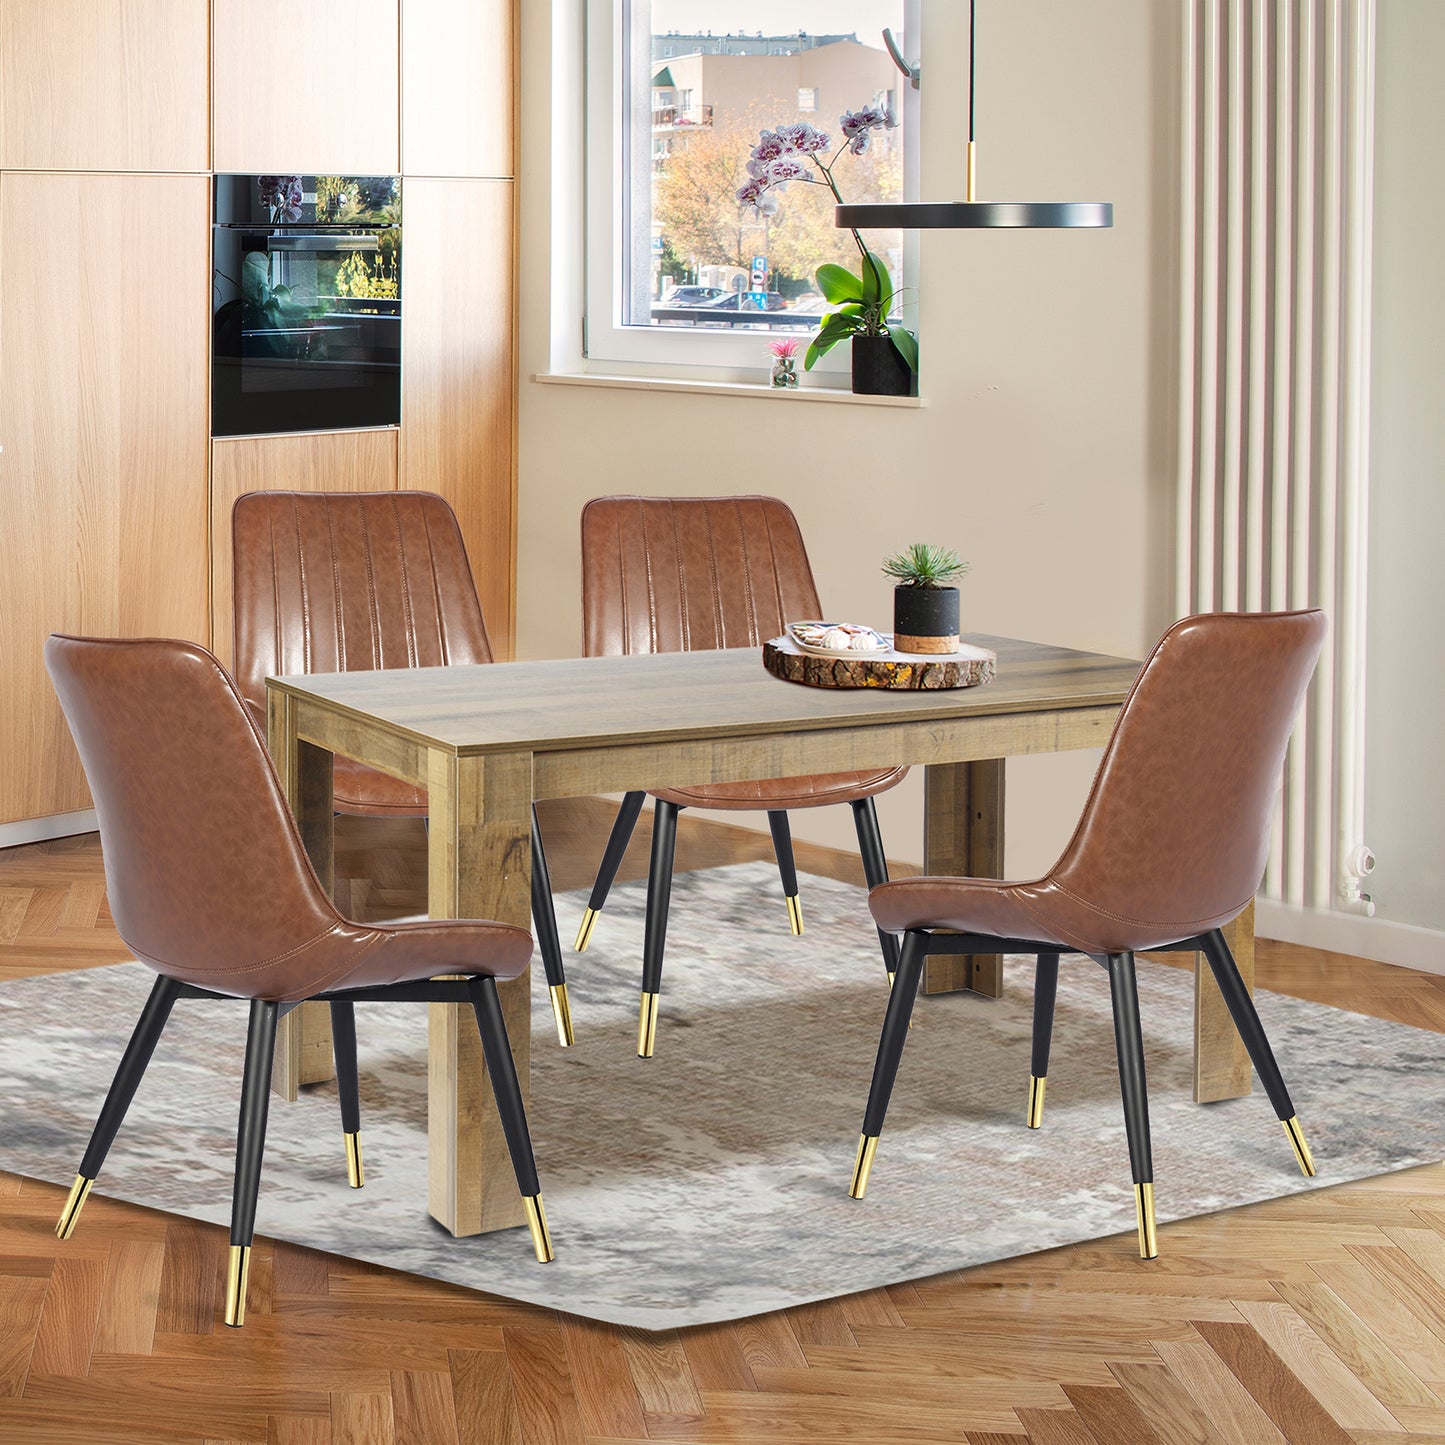 5 Pieces Dining Table Set for 4 - 59 Inch Walnut Table & 4 Pack Brown Leather Chairs